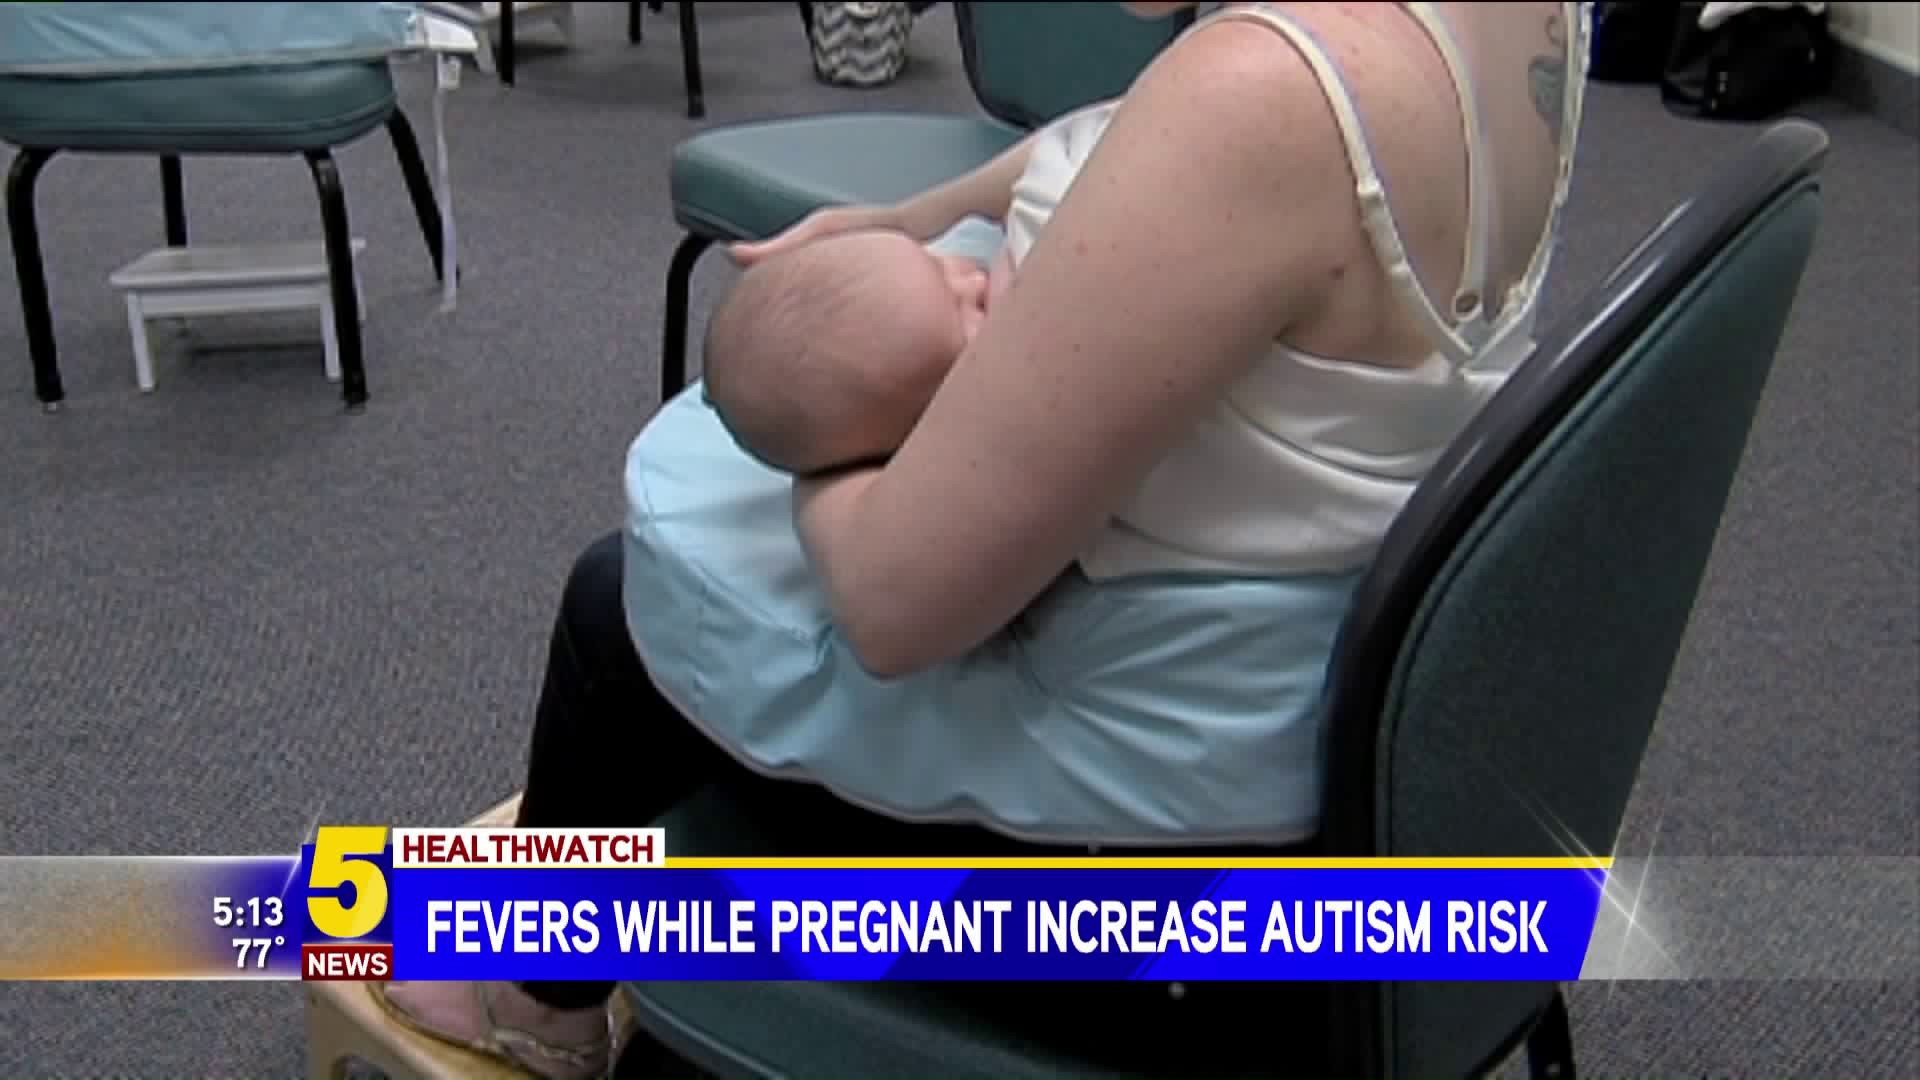 Fevers While Pregnant Increase Autism